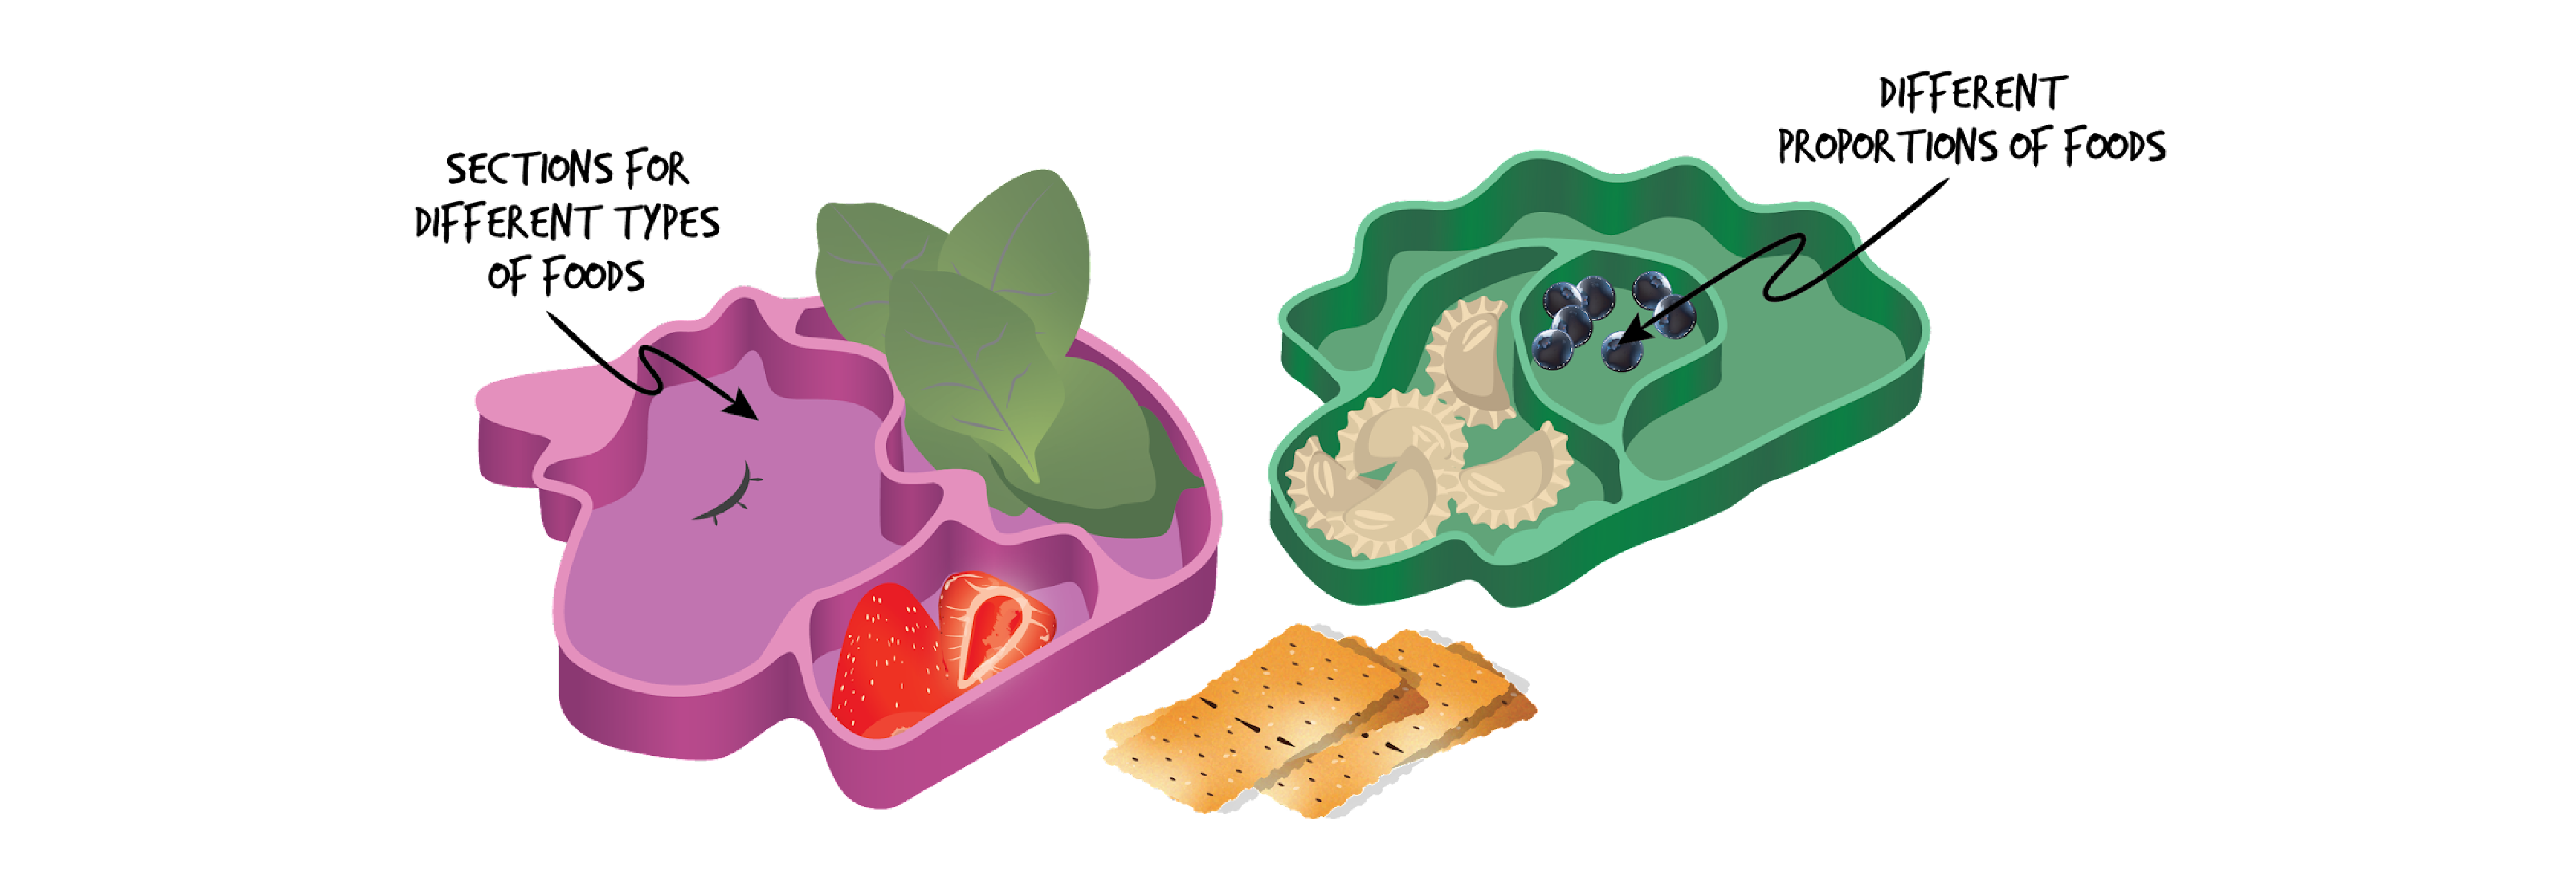 Purple unicorn shaped container with three sections.One section is empty with text Sections for different types of foods point to it, one section has spinach leaves in it and one has two strawberry slices. Beside it is a green dinosaur shaped container with three sections. One section is empty, on has pasta pieces in it and one has blueberries in it with text Different proportions of foods pointing to it. Slices of crackers in front of the containers.